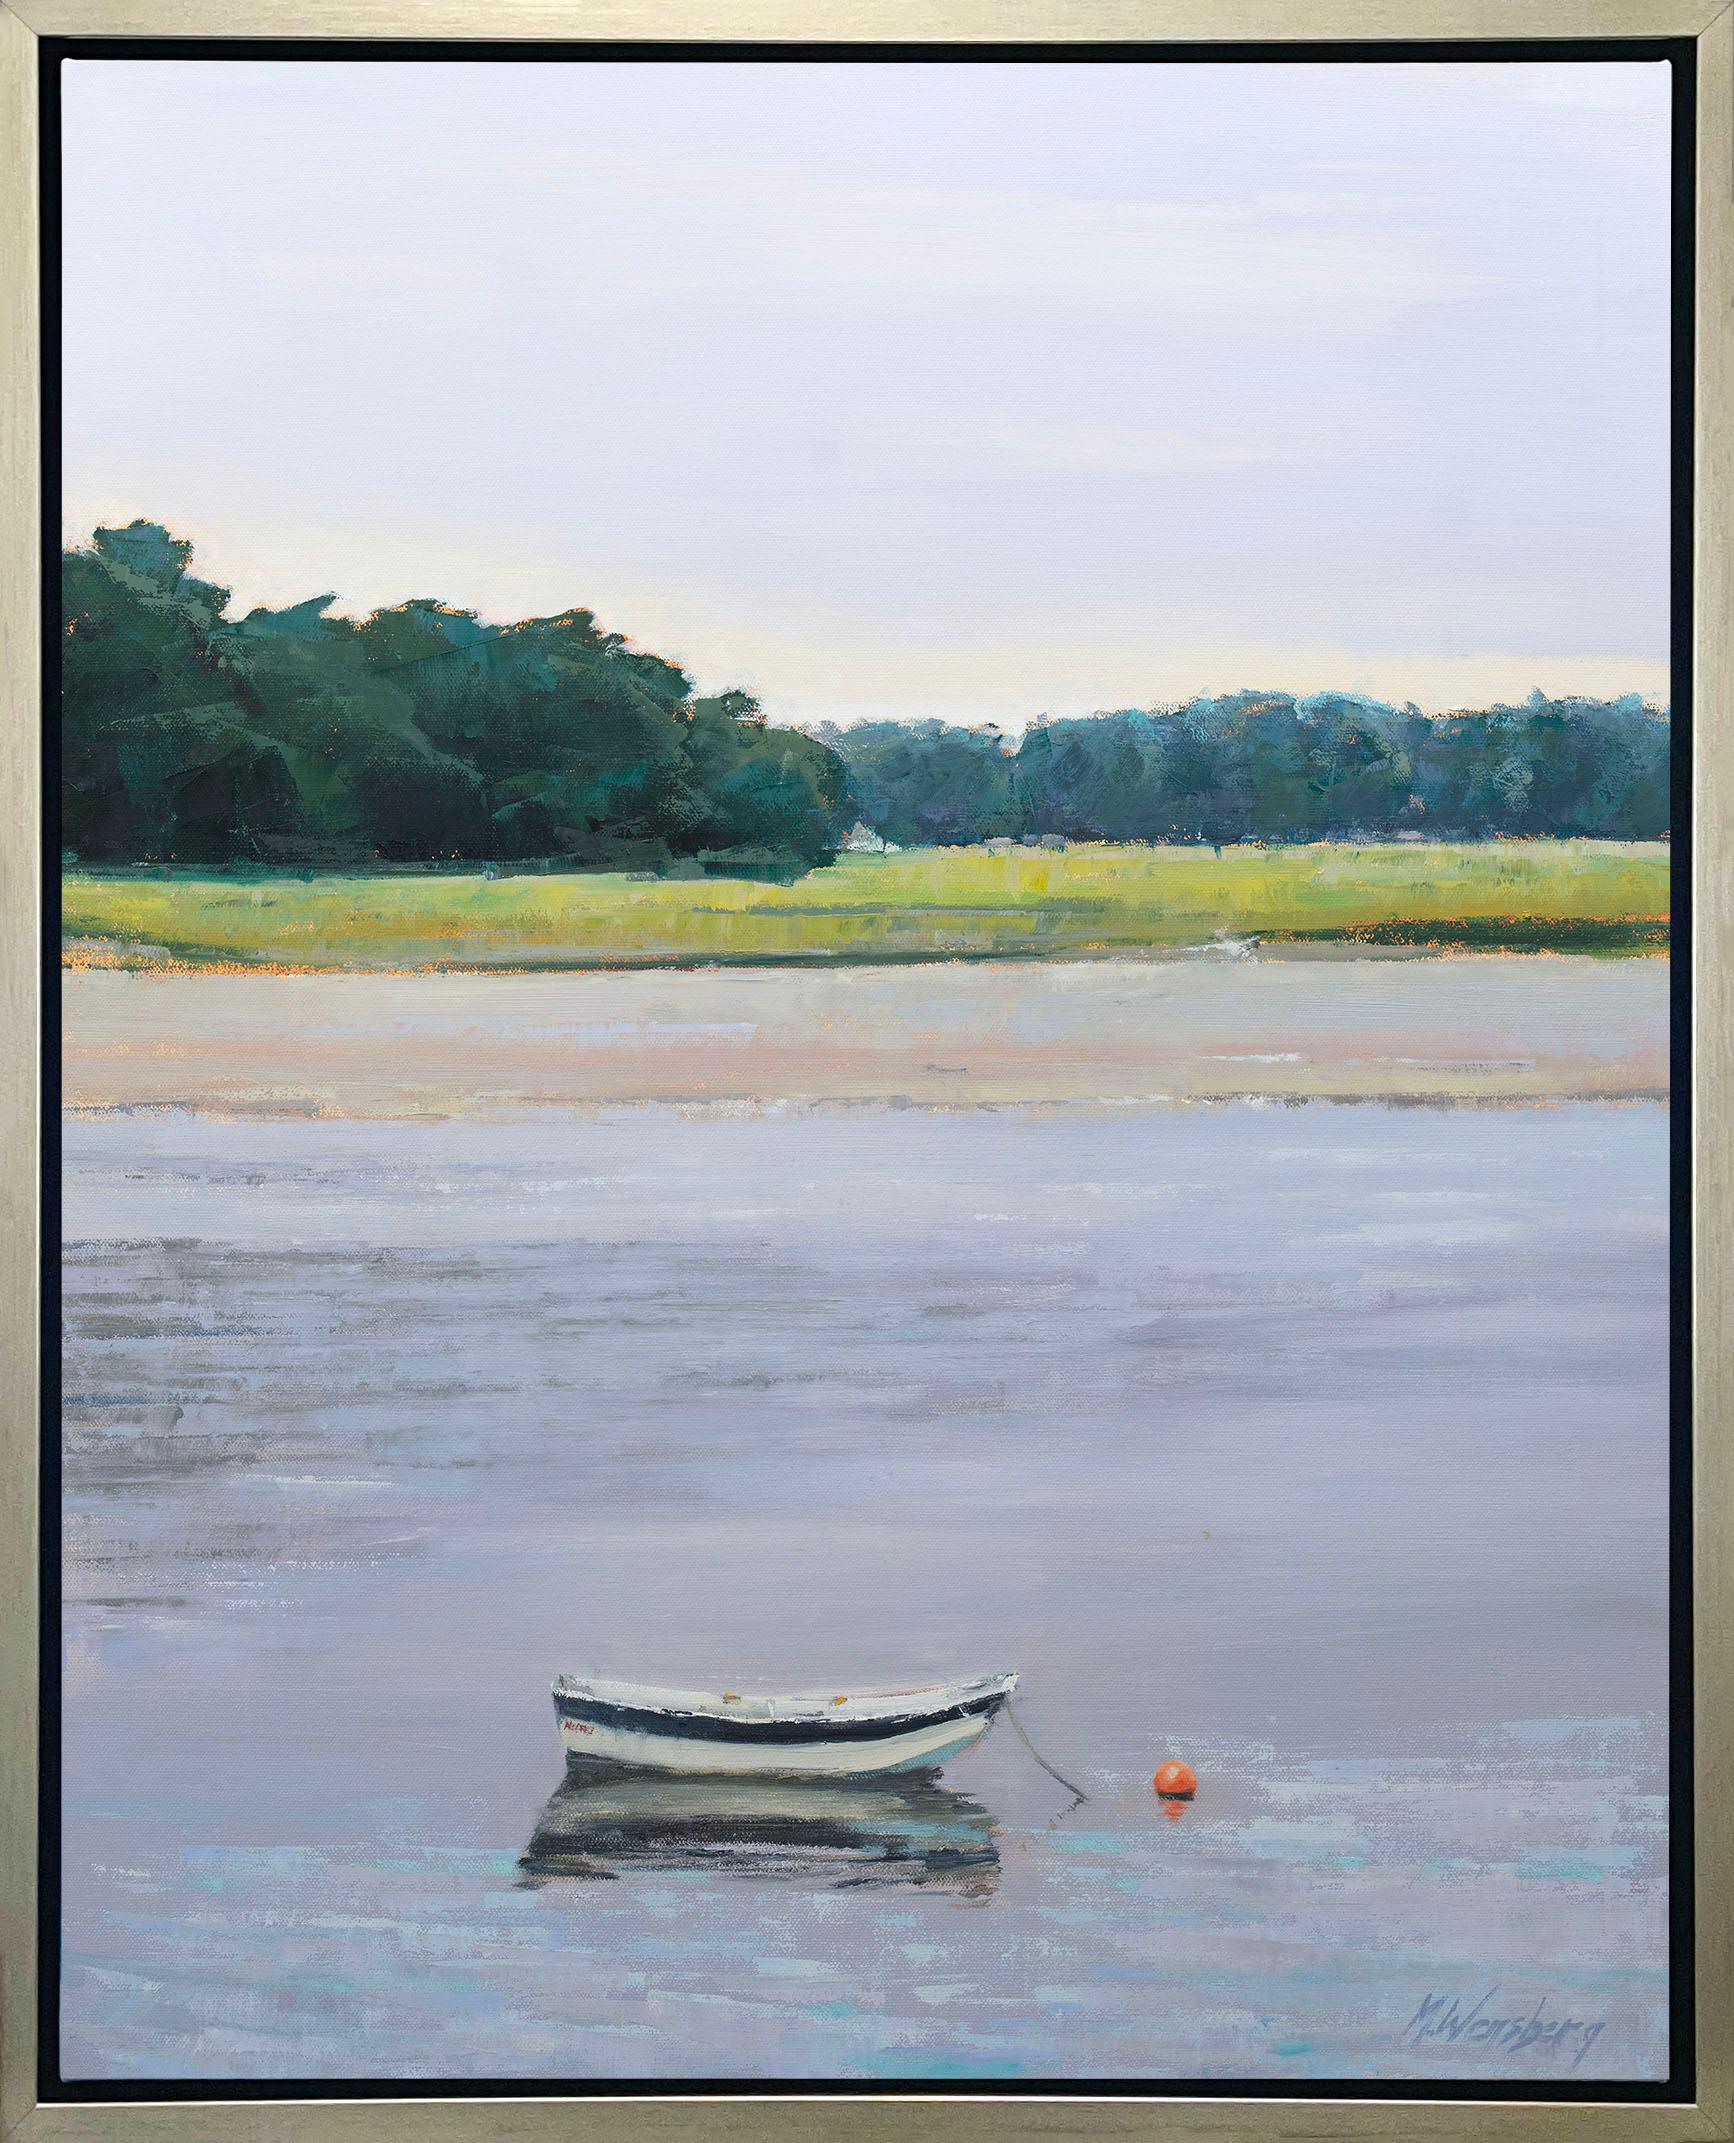 This Limited Edition giclee coastal landscape print by Molly Doe Wensberg is an edition size of 195. The print features a green and light lavender palette, and captures a scene of a small black and white dinghy boat just off the coast of a New